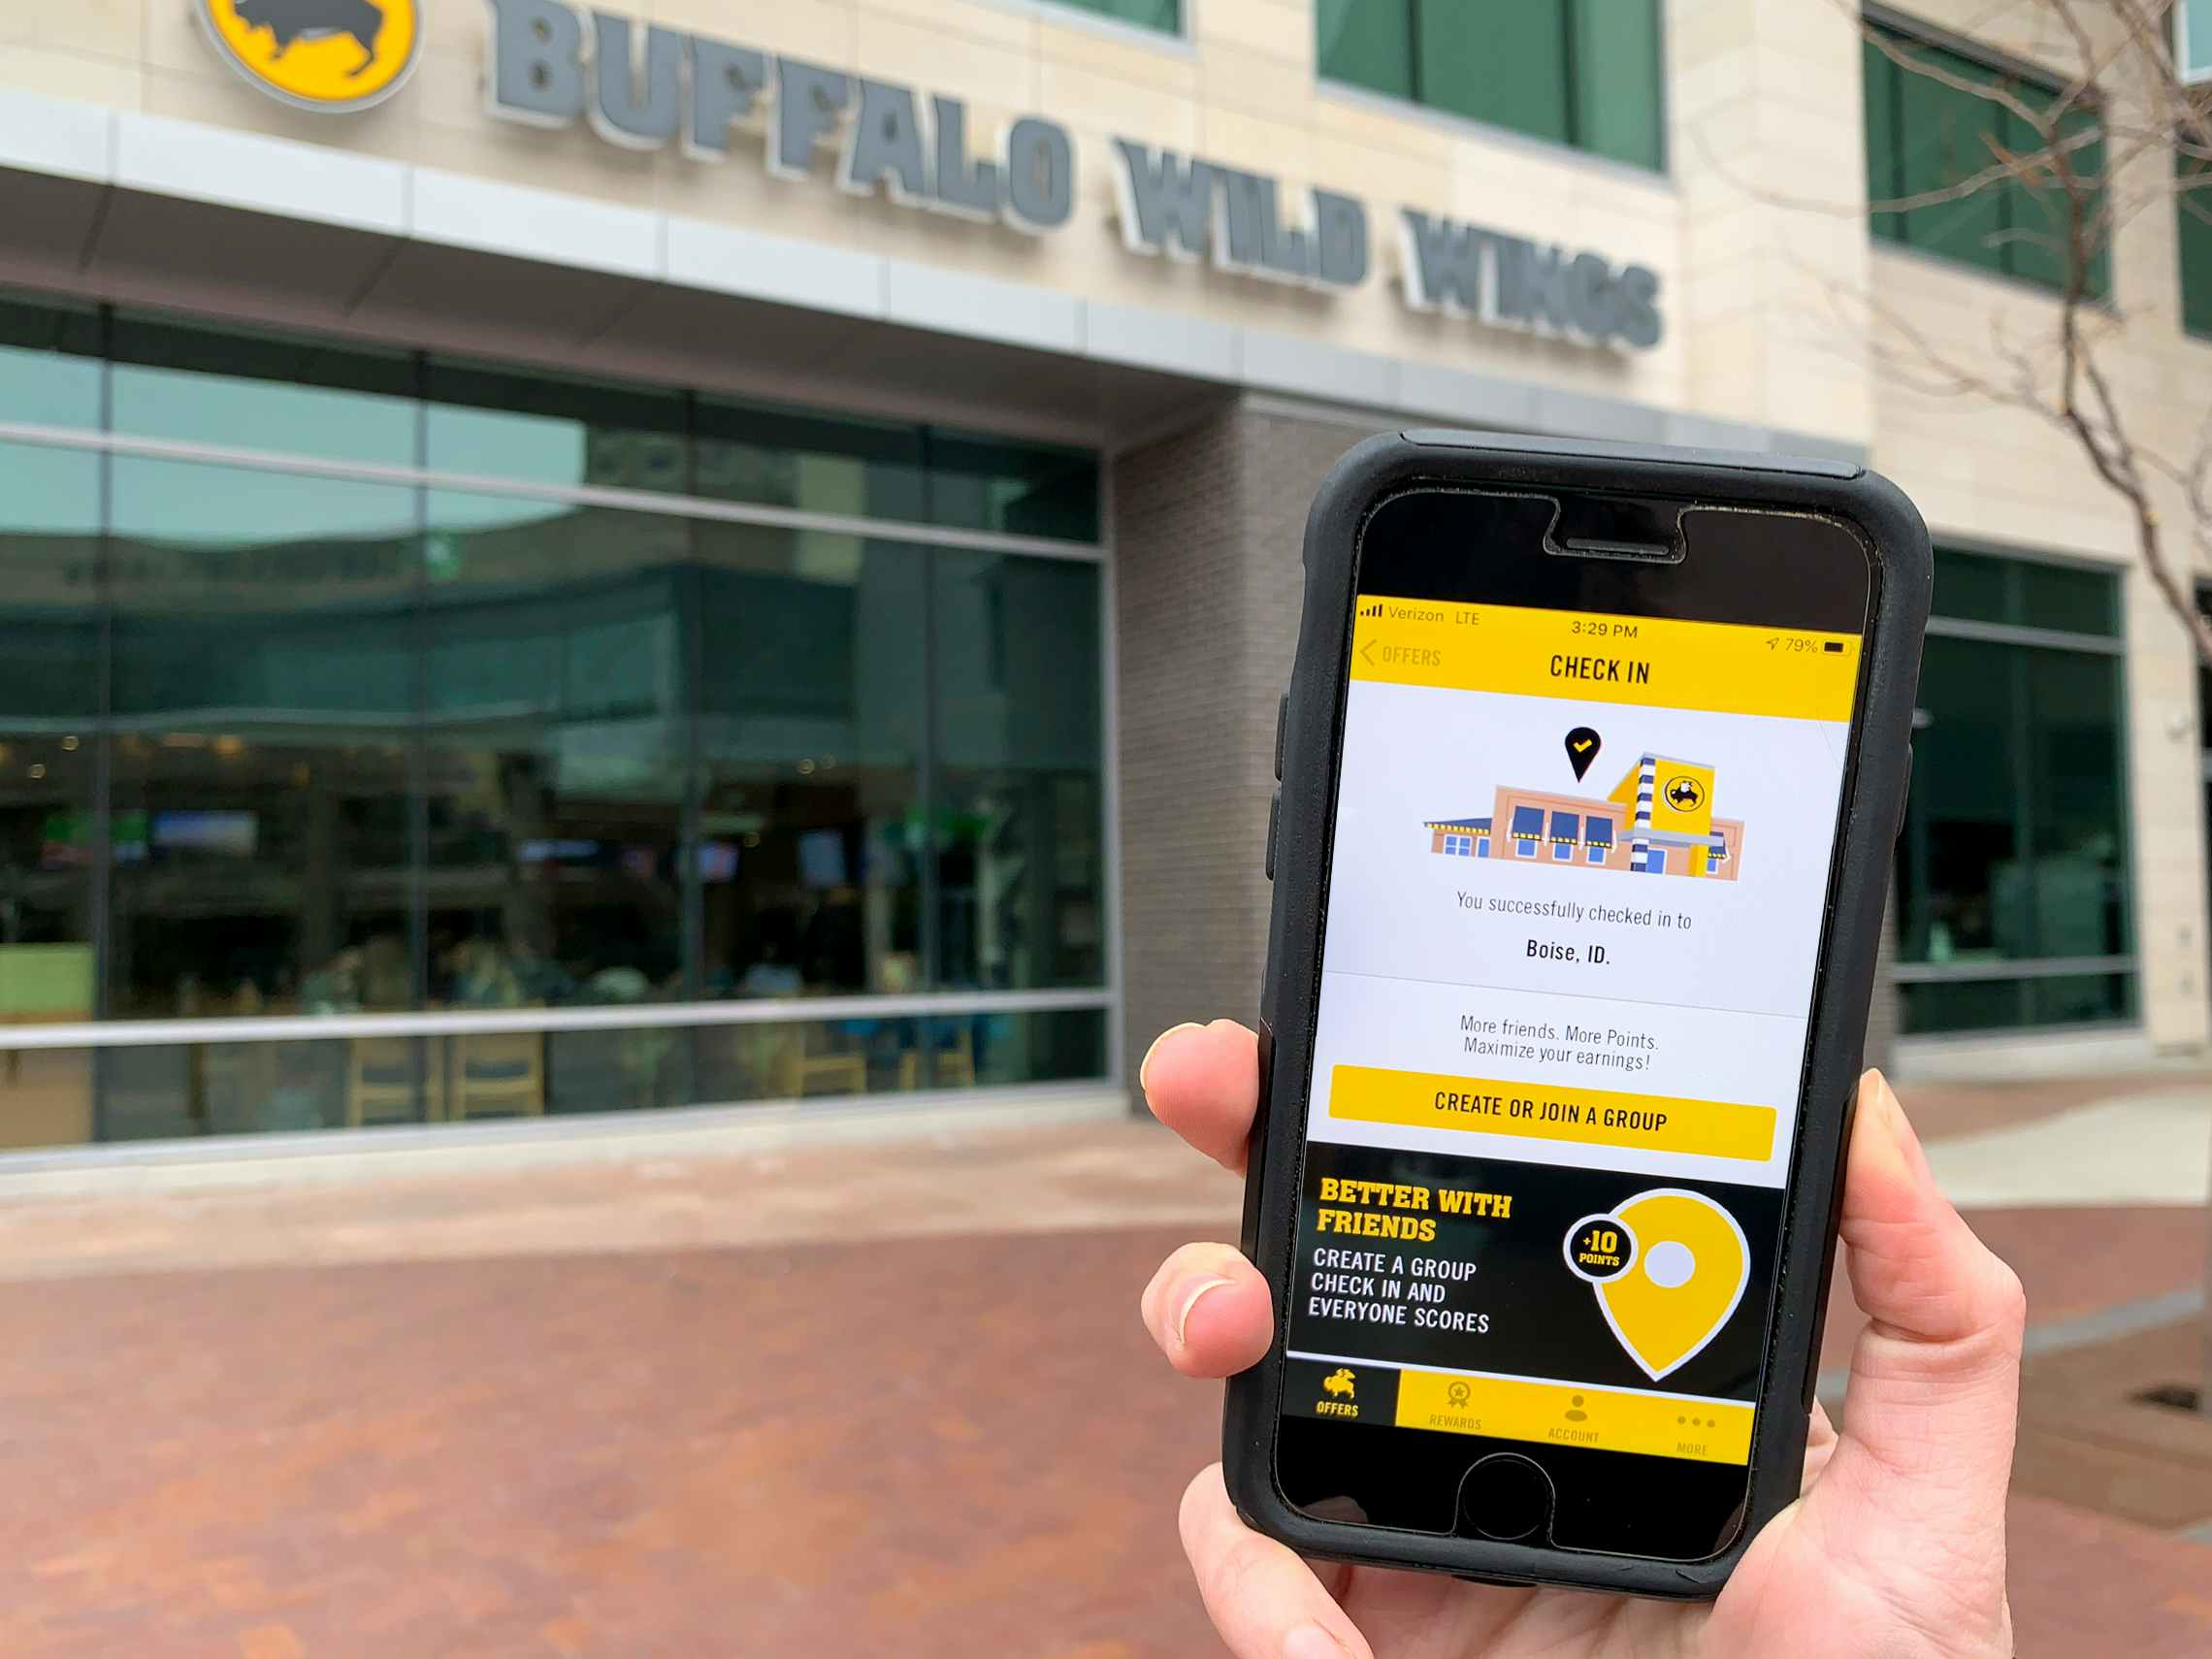 The Checkin portal on the Buffalo Wild Wings App outside the restaurant.